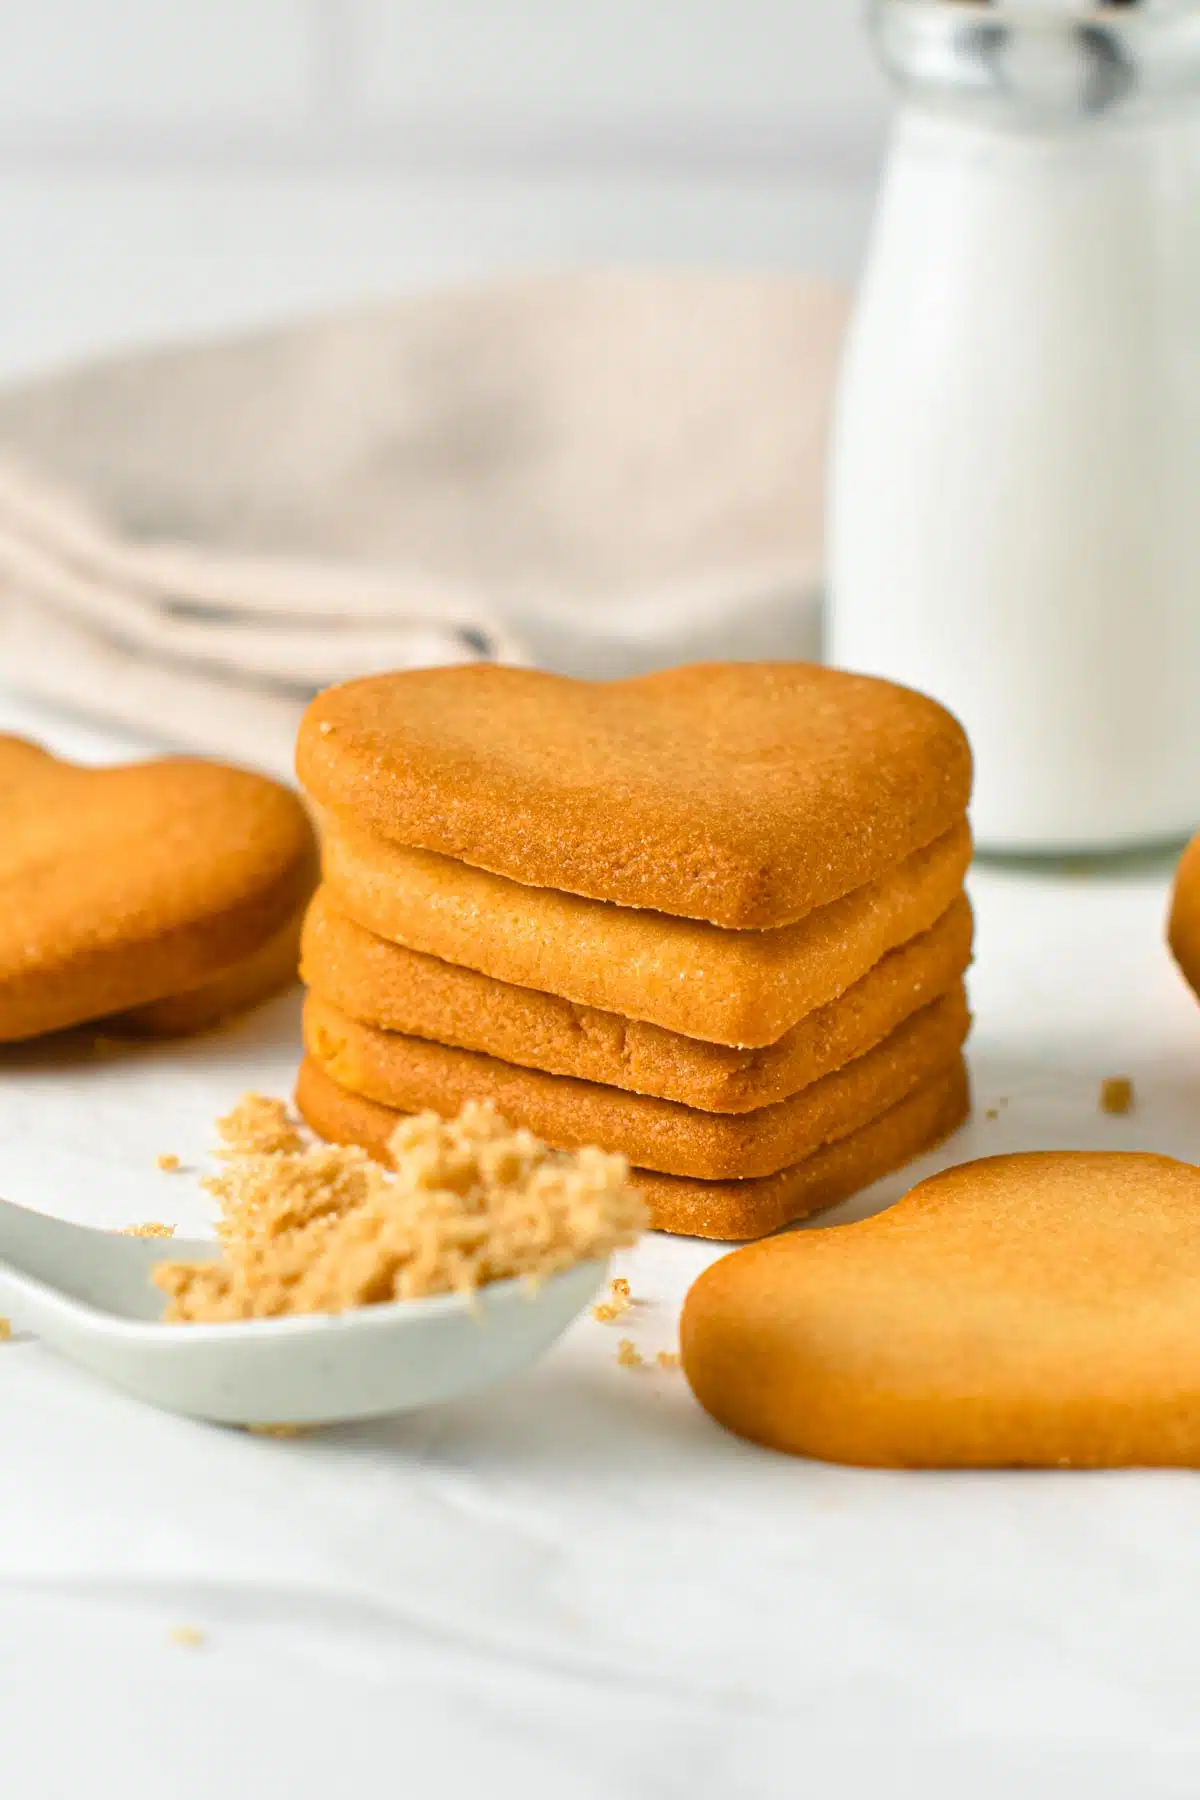 These 3 Ingredient Brown Sugar Cookies are crunchy, cut-out sugar cookies made from brown sugar. Plus, they are allergy friendly too, made without eggs, nut-free and dairy-free option is provided.